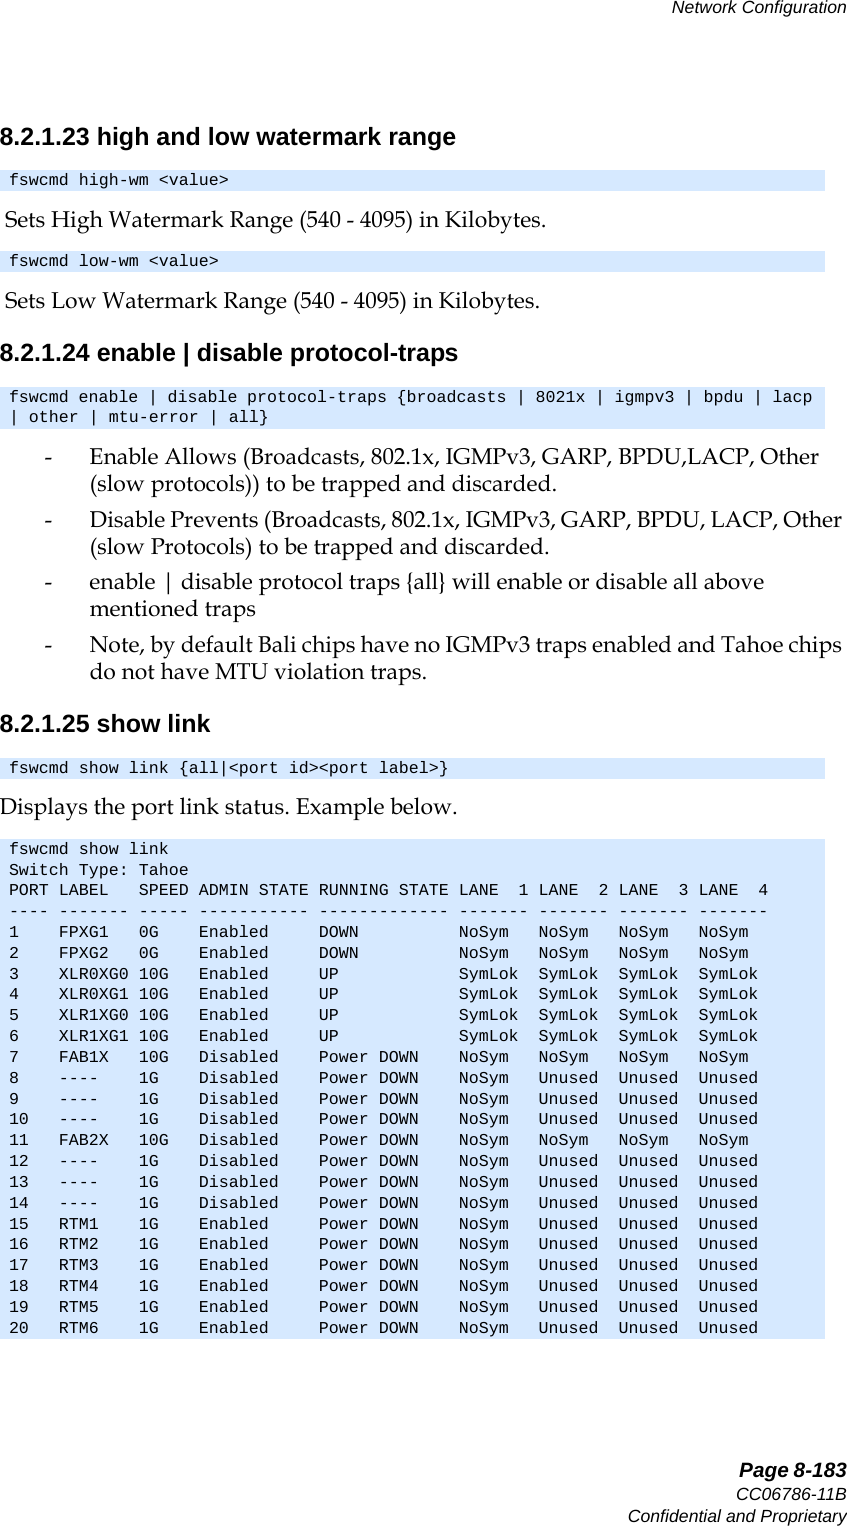   Page 8-183CC06786-11BConfidential and ProprietaryNetwork Configuration14ABABPreliminary8.2.1.23 high and low watermark range Sets High Watermark Range (540 - 4095) in Kilobytes. Sets Low Watermark Range (540 - 4095) in Kilobytes.8.2.1.24 enable | disable protocol-traps- Enable Allows (Broadcasts, 802.1x, IGMPv3, GARP, BPDU,LACP, Other (slow protocols)) to be trapped and discarded.- Disable Prevents (Broadcasts, 802.1x, IGMPv3, GARP, BPDU, LACP, Other (slow Protocols) to be trapped and discarded.- enable | disable protocol traps {all} will enable or disable all above mentioned traps- Note, by default Bali chips have no IGMPv3 traps enabled and Tahoe chips do not have MTU violation traps.8.2.1.25 show linkDisplays the port link status. Example below.fswcmd high-wm &lt;value&gt;fswcmd low-wm &lt;value&gt;fswcmd enable | disable protocol-traps {broadcasts | 8021x | igmpv3 | bpdu | lacp | other | mtu-error | all}fswcmd show link {all|&lt;port id&gt;&lt;port label&gt;}fswcmd show linkSwitch Type: TahoePORT LABEL   SPEED ADMIN STATE RUNNING STATE LANE  1 LANE  2 LANE  3 LANE  4---- ------- ----- ----------- ------------- ------- ------- ------- -------1    FPXG1   0G    Enabled     DOWN          NoSym   NoSym   NoSym   NoSym  2    FPXG2   0G    Enabled     DOWN          NoSym   NoSym   NoSym   NoSym  3    XLR0XG0 10G   Enabled     UP            SymLok  SymLok  SymLok  SymLok 4    XLR0XG1 10G   Enabled     UP            SymLok  SymLok  SymLok  SymLok 5    XLR1XG0 10G   Enabled     UP            SymLok  SymLok  SymLok  SymLok 6    XLR1XG1 10G   Enabled     UP            SymLok  SymLok  SymLok  SymLok 7    FAB1X   10G   Disabled    Power DOWN    NoSym   NoSym   NoSym   NoSym  8    ----    1G    Disabled    Power DOWN    NoSym   Unused  Unused  Unused 9    ----    1G    Disabled    Power DOWN    NoSym   Unused  Unused  Unused 10   ----    1G    Disabled    Power DOWN    NoSym   Unused  Unused  Unused 11   FAB2X   10G   Disabled    Power DOWN    NoSym   NoSym   NoSym   NoSym  12   ----    1G    Disabled    Power DOWN    NoSym   Unused  Unused  Unused 13   ----    1G    Disabled    Power DOWN    NoSym   Unused  Unused  Unused 14   ----    1G    Disabled    Power DOWN    NoSym   Unused  Unused  Unused 15   RTM1    1G    Enabled     Power DOWN    NoSym   Unused  Unused  Unused 16   RTM2    1G    Enabled     Power DOWN    NoSym   Unused  Unused  Unused 17   RTM3    1G    Enabled     Power DOWN    NoSym   Unused  Unused  Unused 18   RTM4    1G    Enabled     Power DOWN    NoSym   Unused  Unused  Unused 19   RTM5    1G    Enabled     Power DOWN    NoSym   Unused  Unused  Unused 20   RTM6    1G    Enabled     Power DOWN    NoSym   Unused  Unused  Unused 